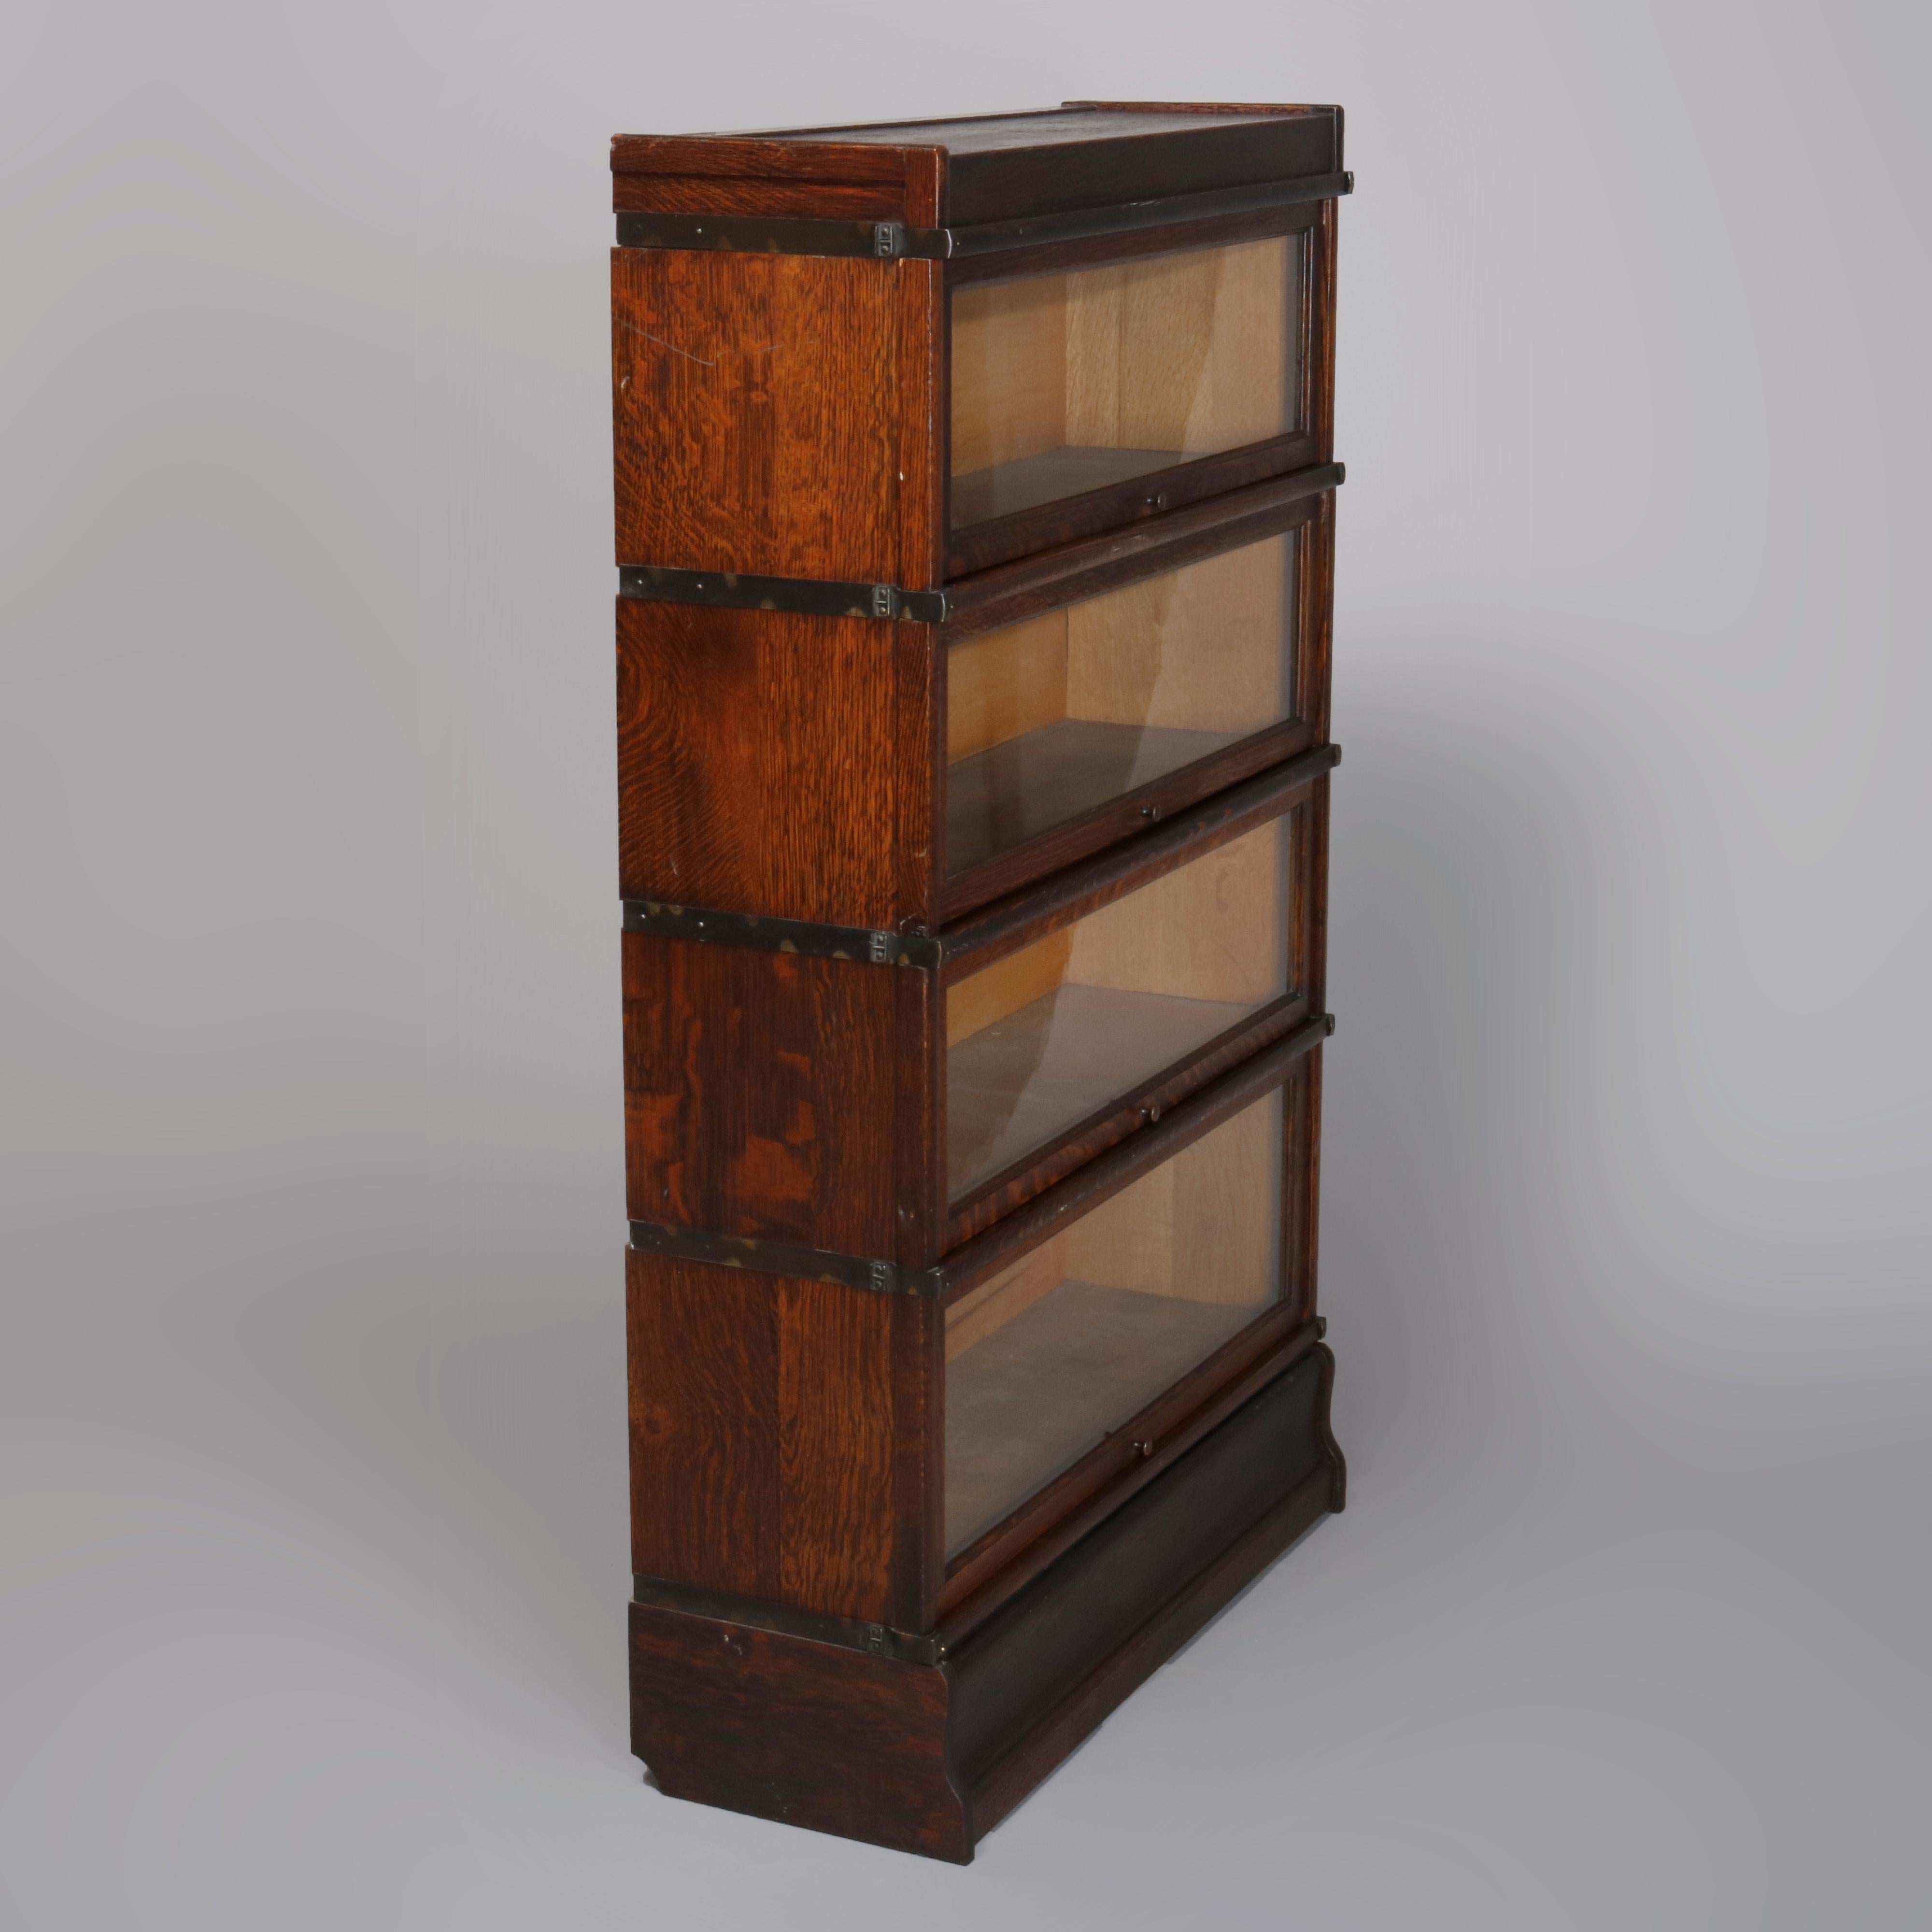 An antique Arts & Crafts mission oak Barrister bookcase by Globe Wernicke offers quarter sawn oak construction with four stacks, each having pull-out glass doors and original maker labels, circa 1920.

Measures: 54.25